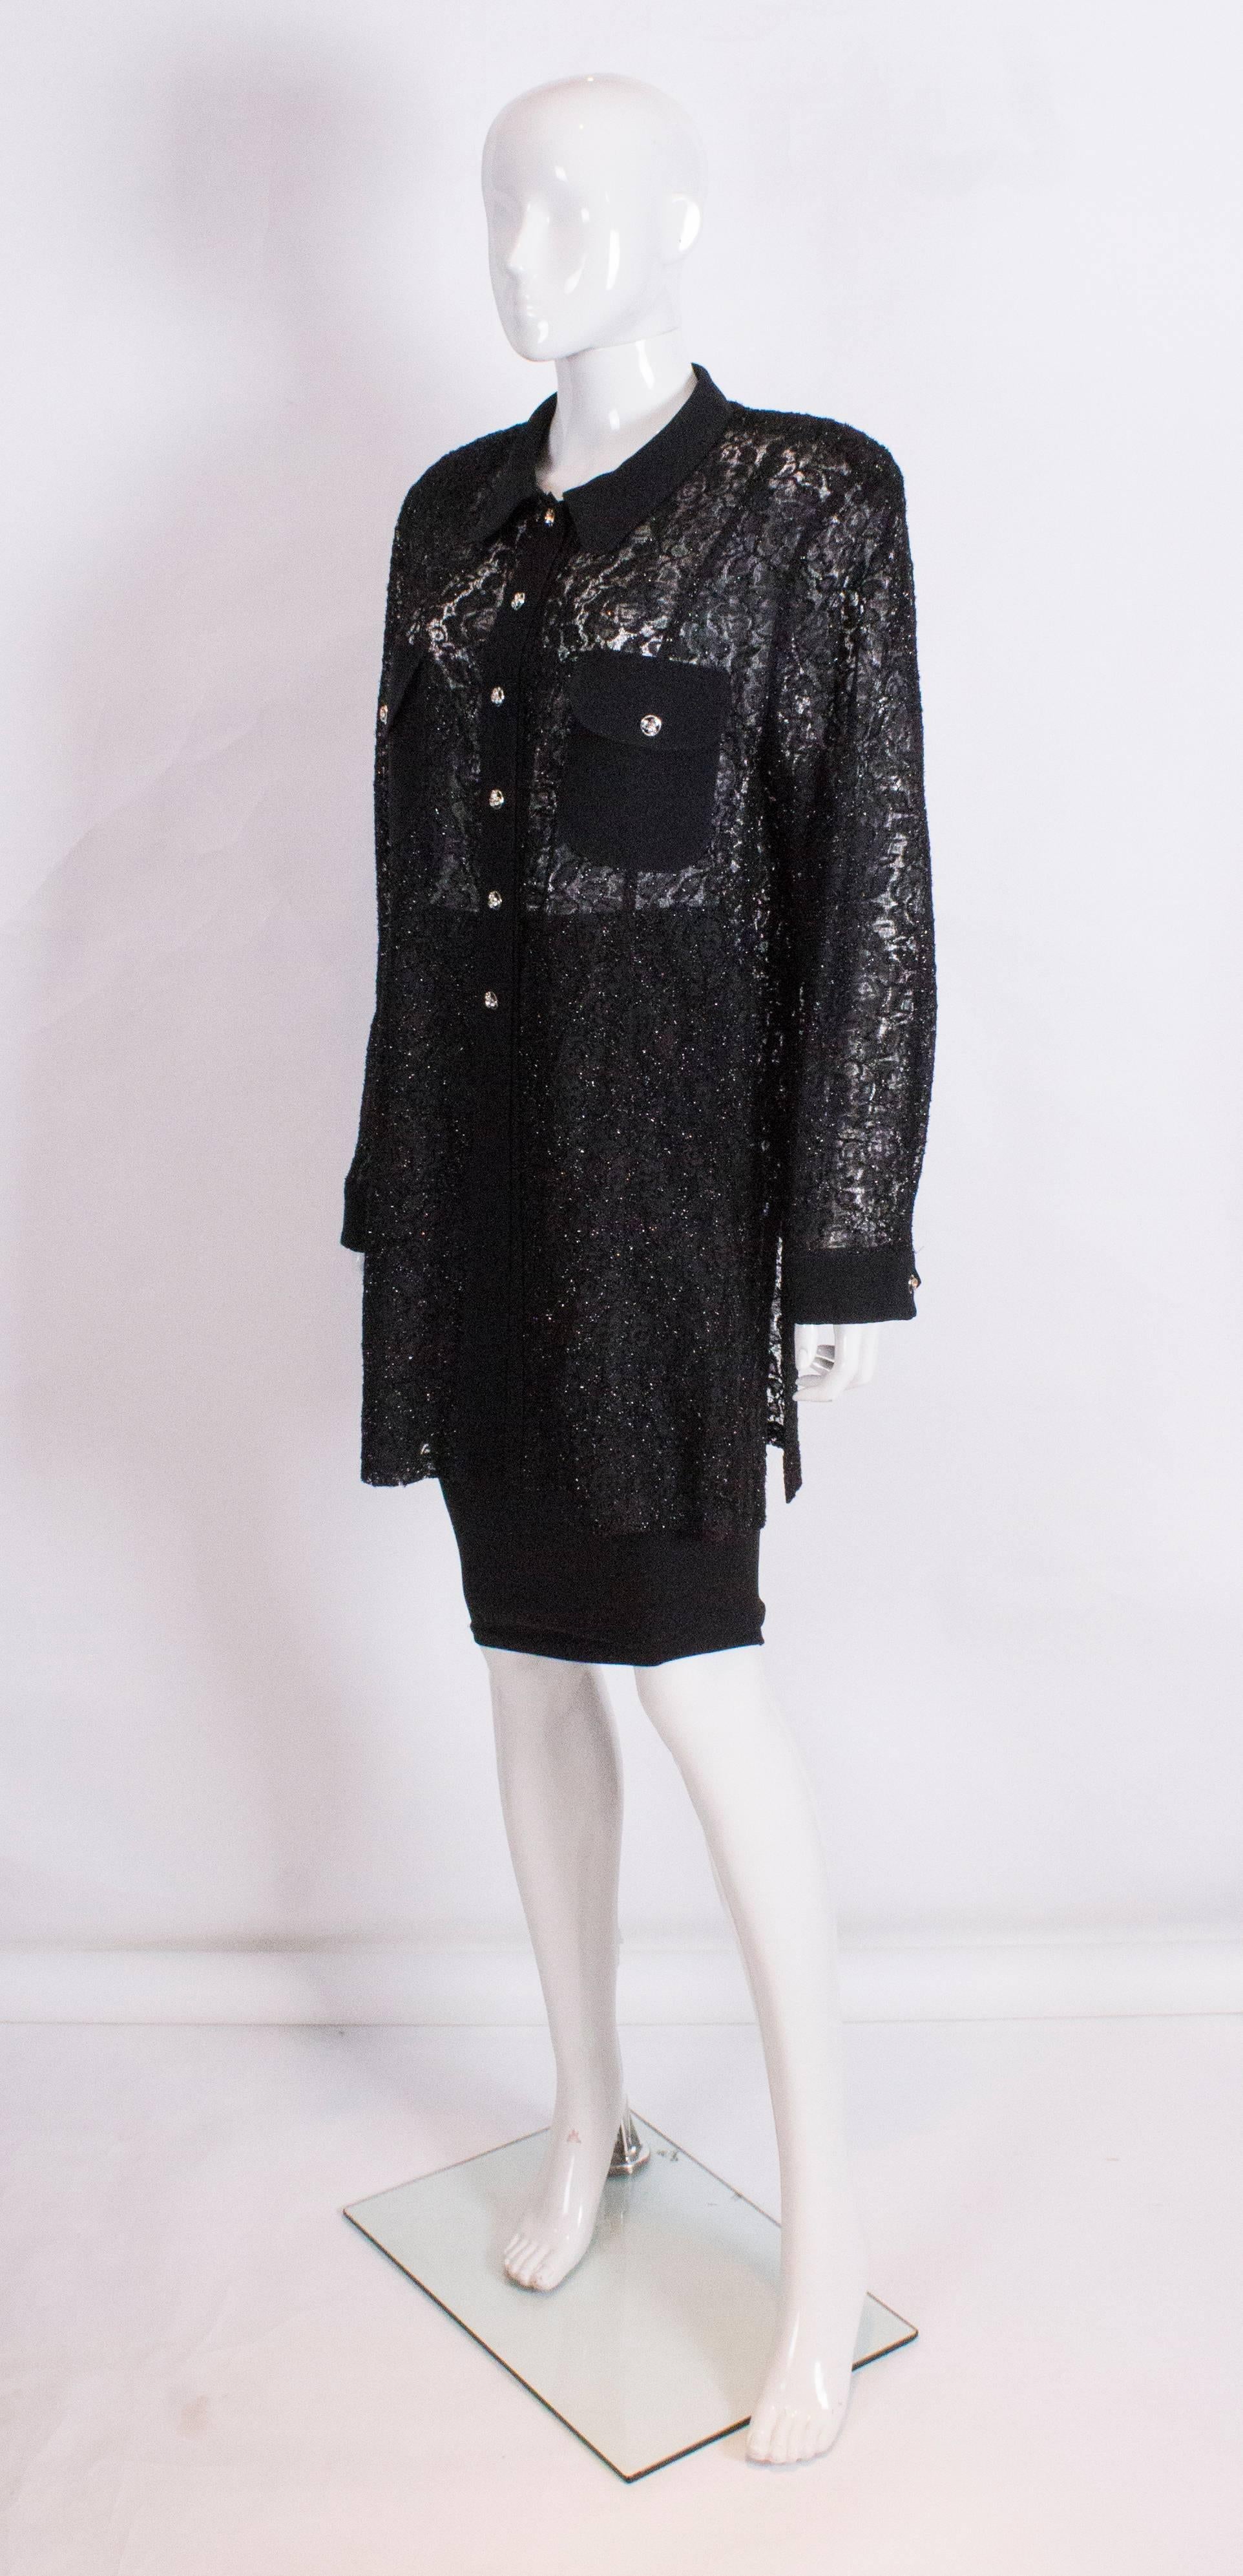 A  chic vintage black evening shirt/jacket by British designer Hardy Amies. The shirt has a black   collar, 2 breast pockets, and a 6 button front opening. The fabric is a black sparkly lace. The shirt has 9 1/2'' slits at either side, and wonderful